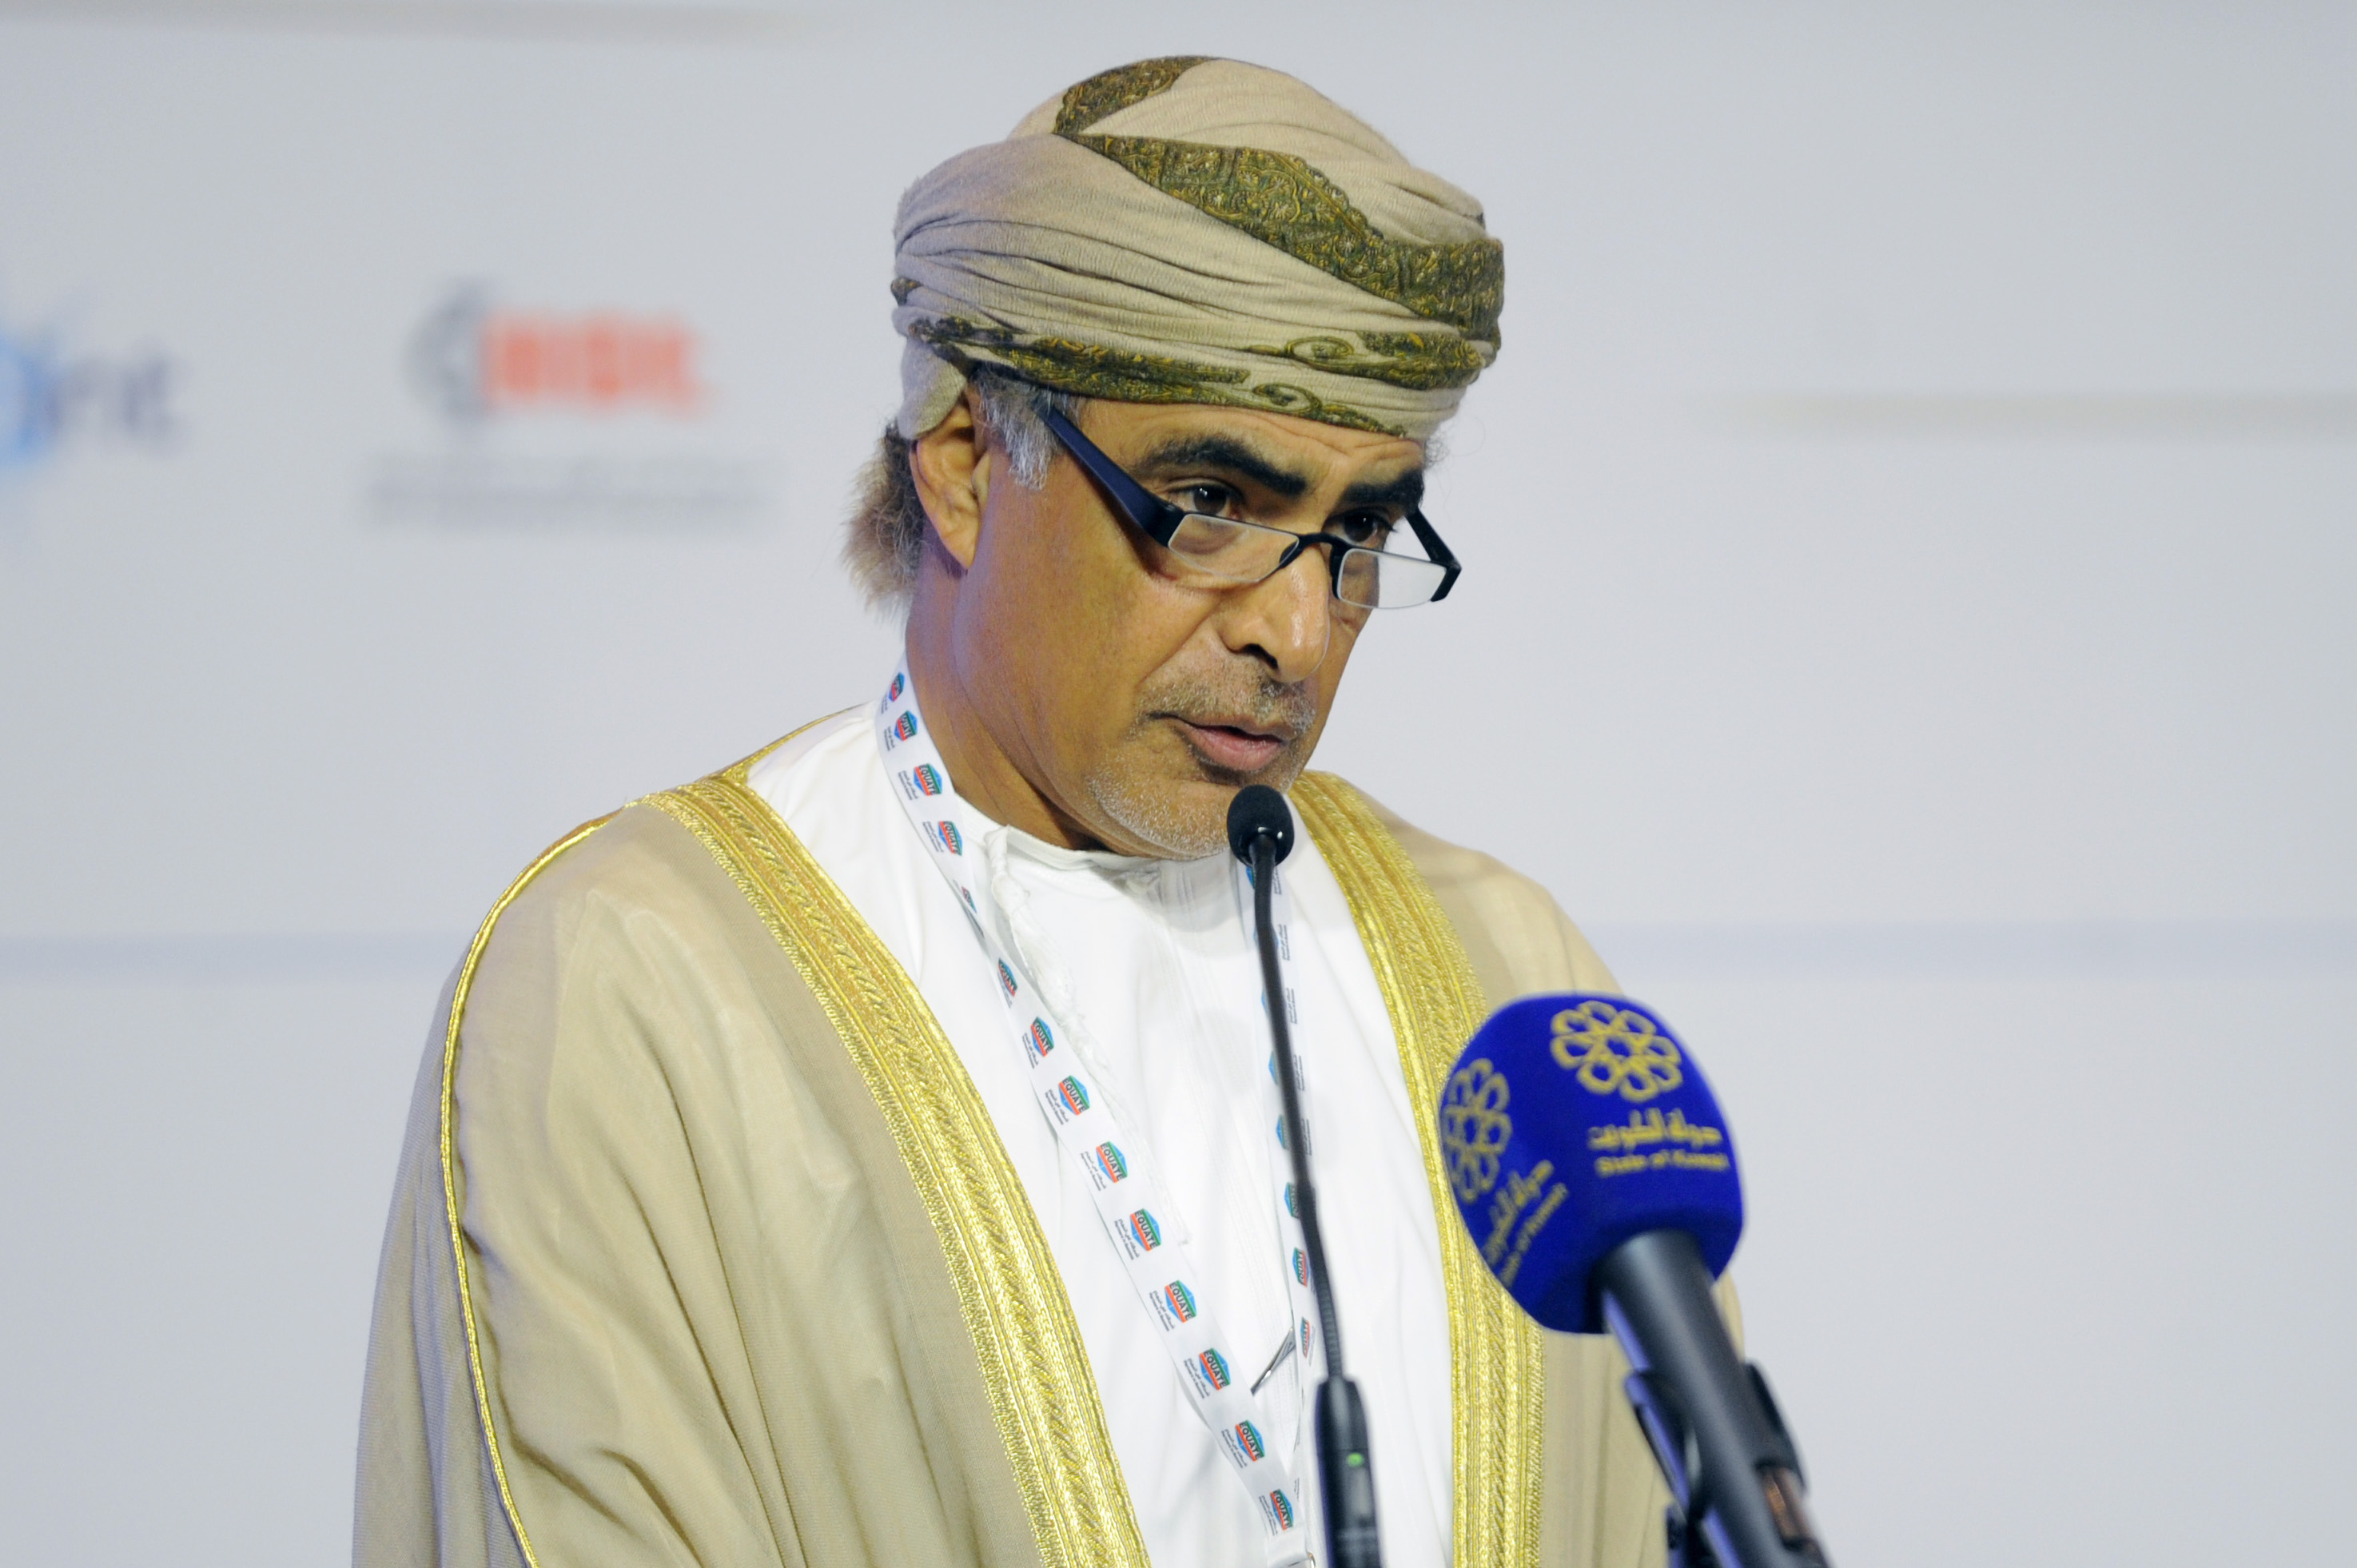 Oman's Minister of Oil and Gas Mohammed Al-Rumhi